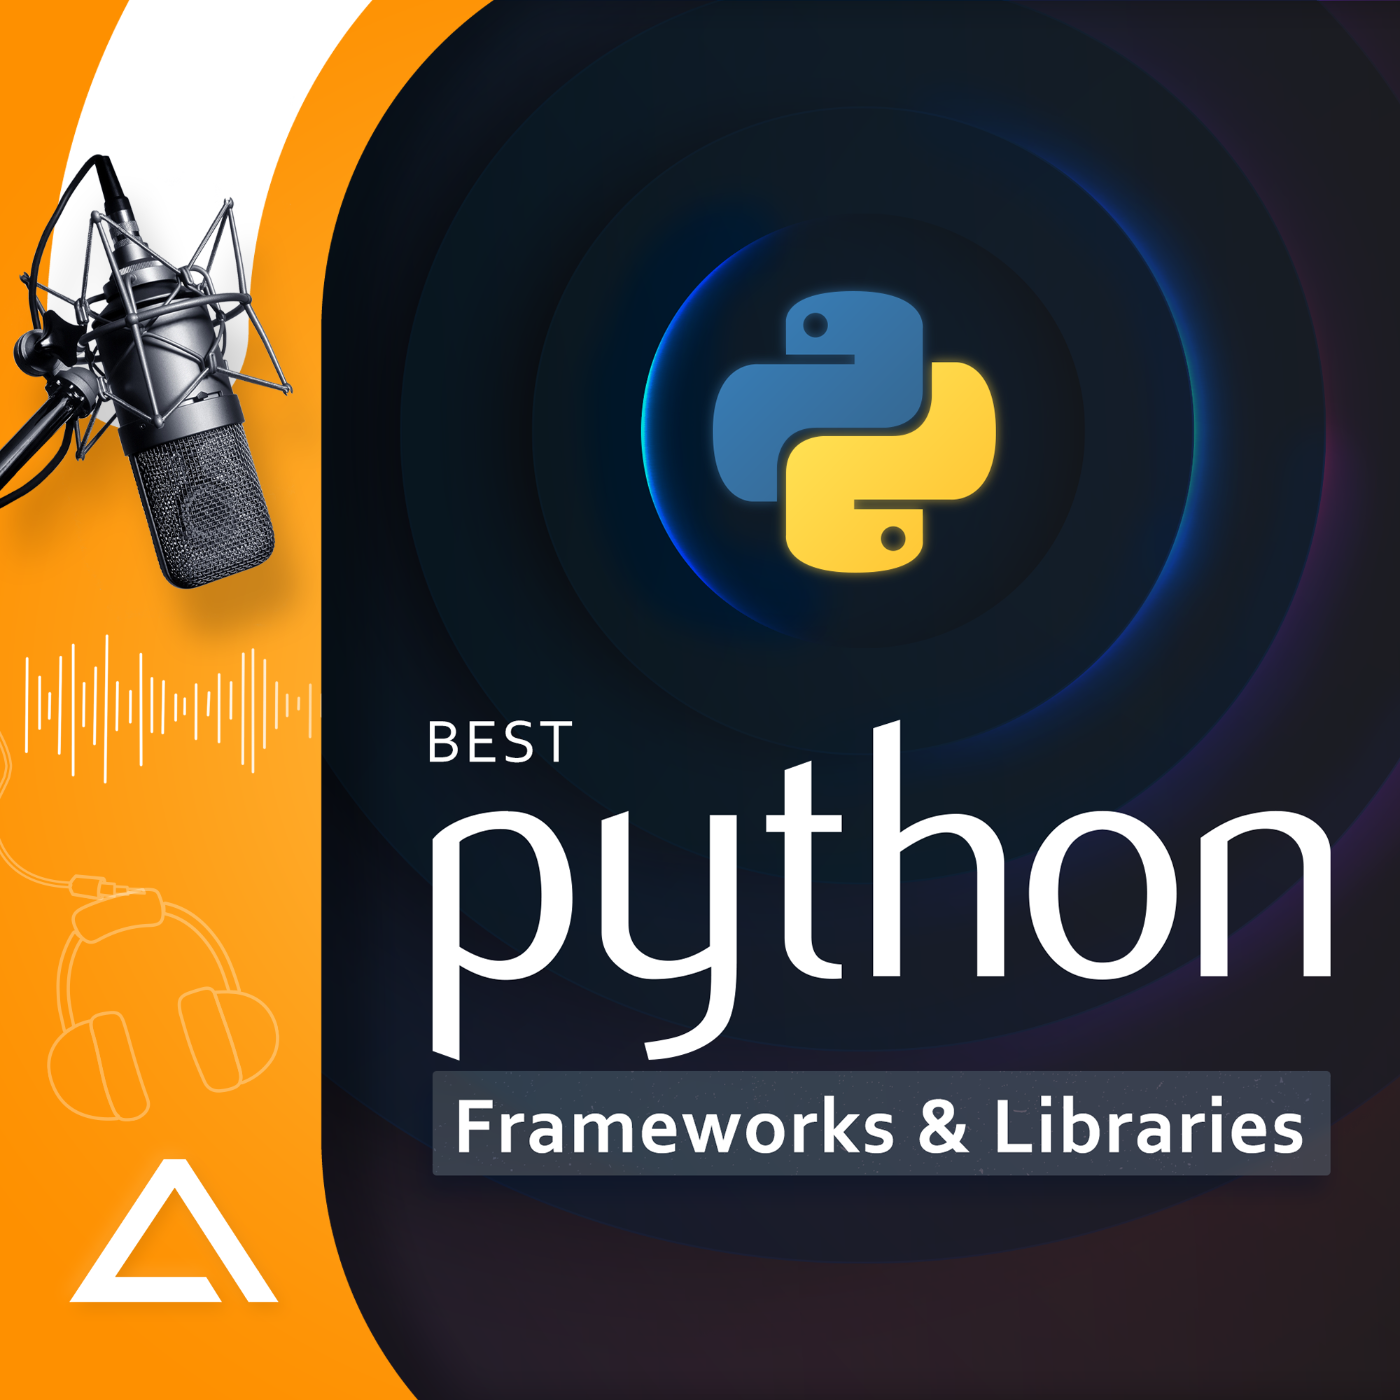 Best Python Frameworks & Libraries to Use